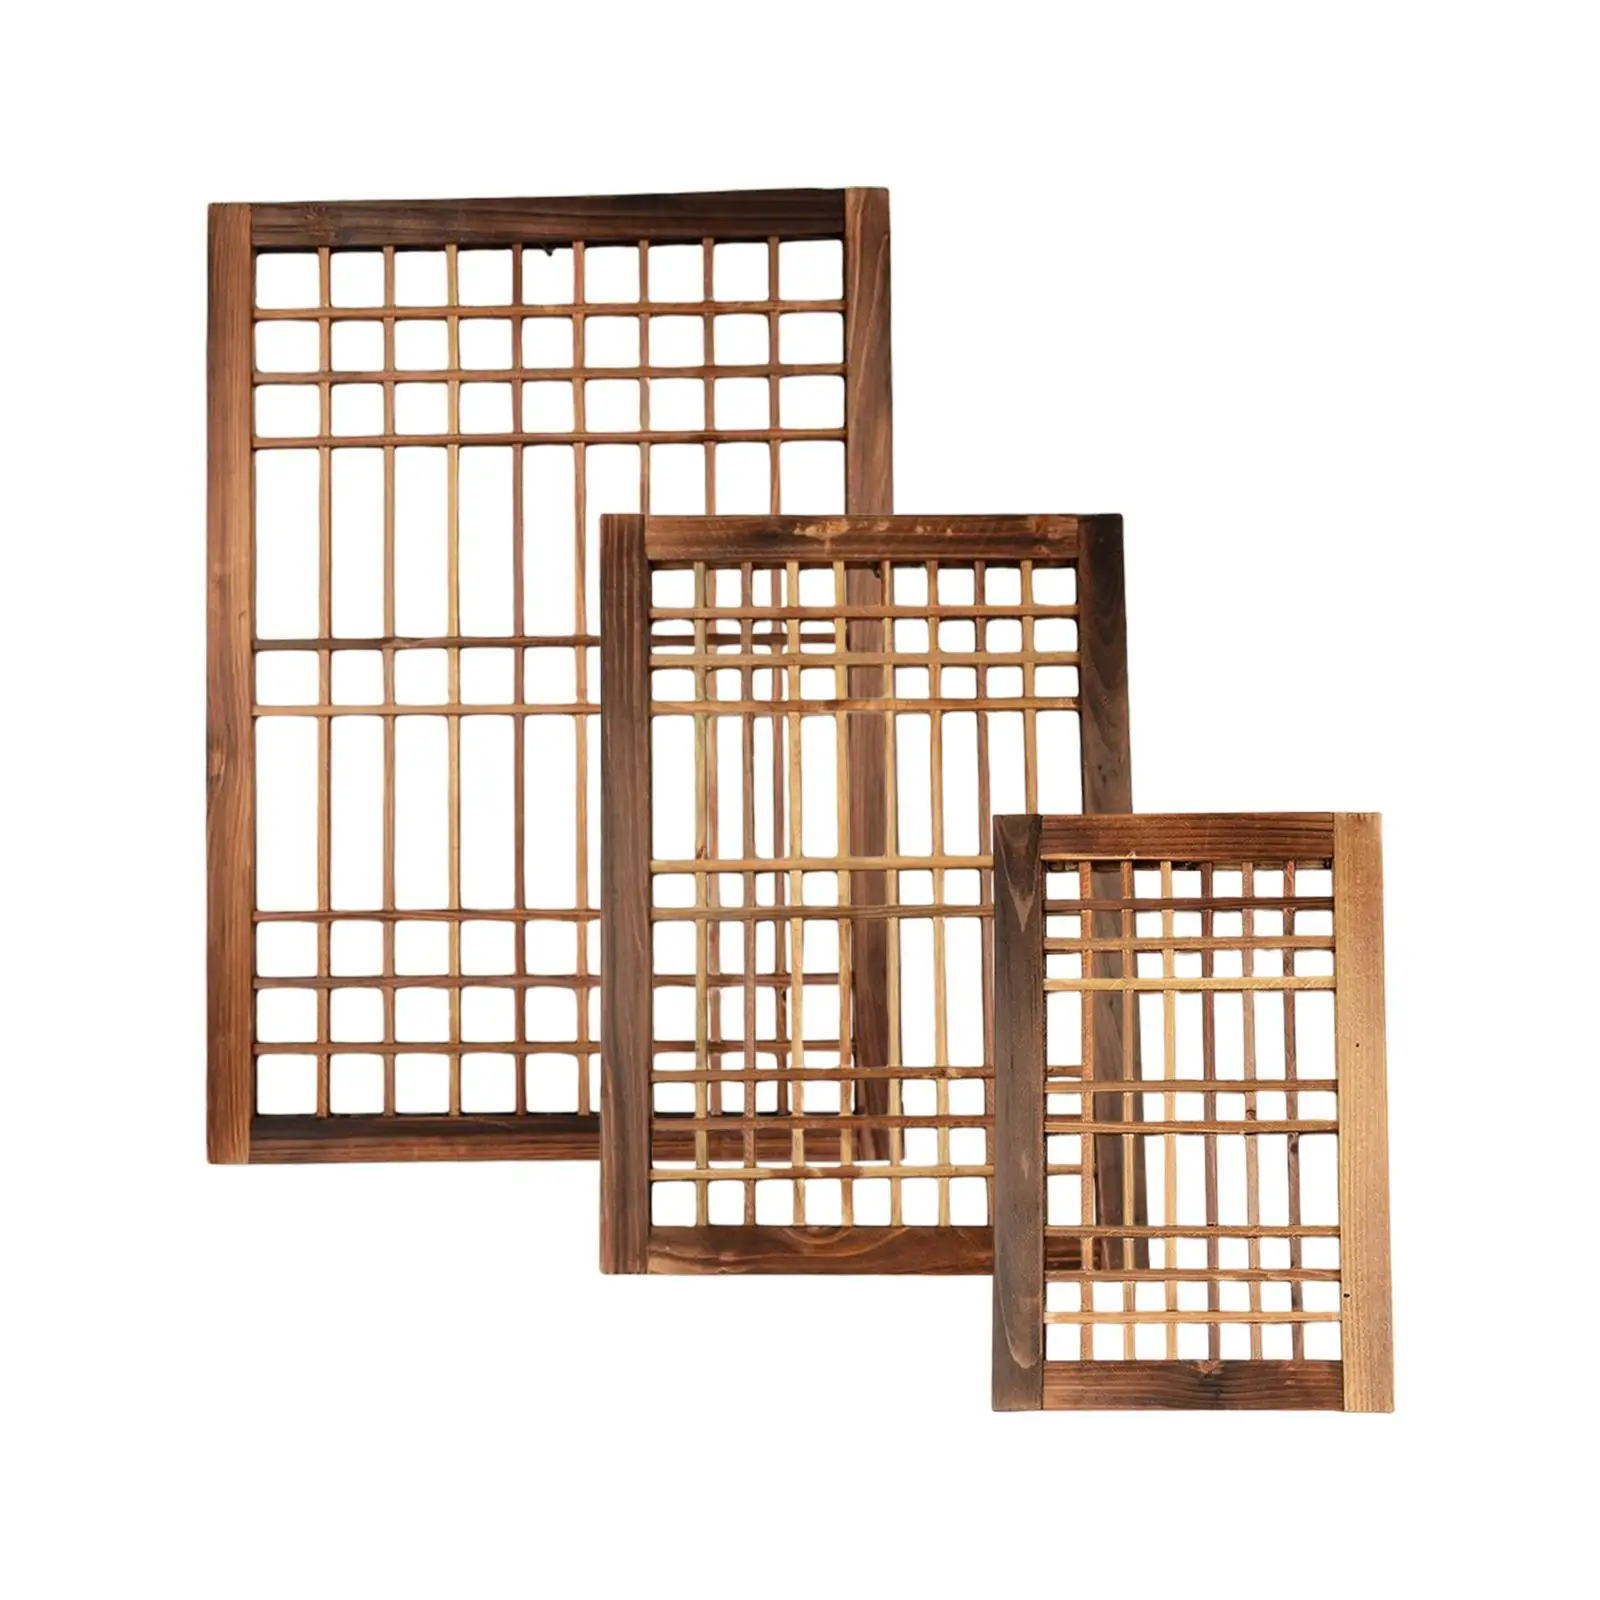 Wooden Window Frame Lattice Window Pane Wall Decor for Vine Climbing Simple Old Vintage Style Easy to Hang Lightweight